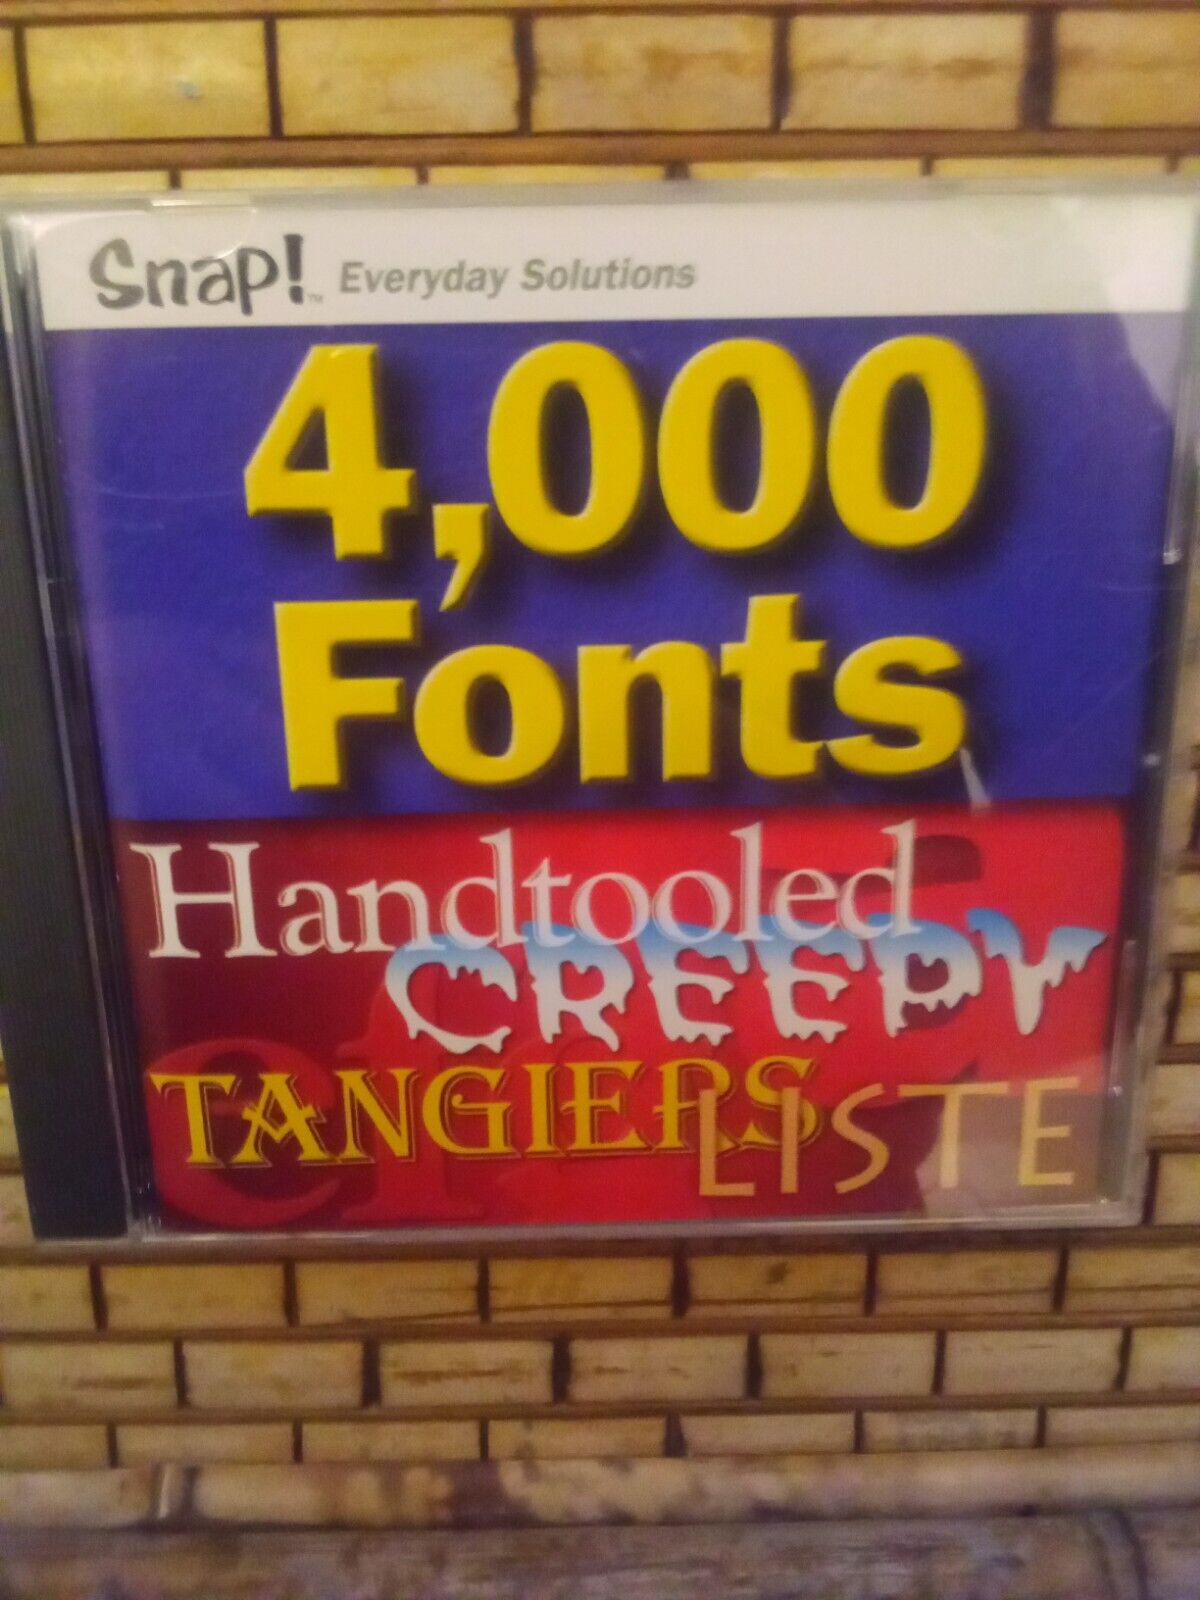 Snap Everyday Solutions 4,000 4000 Fonts CD for Windows 95 / 98